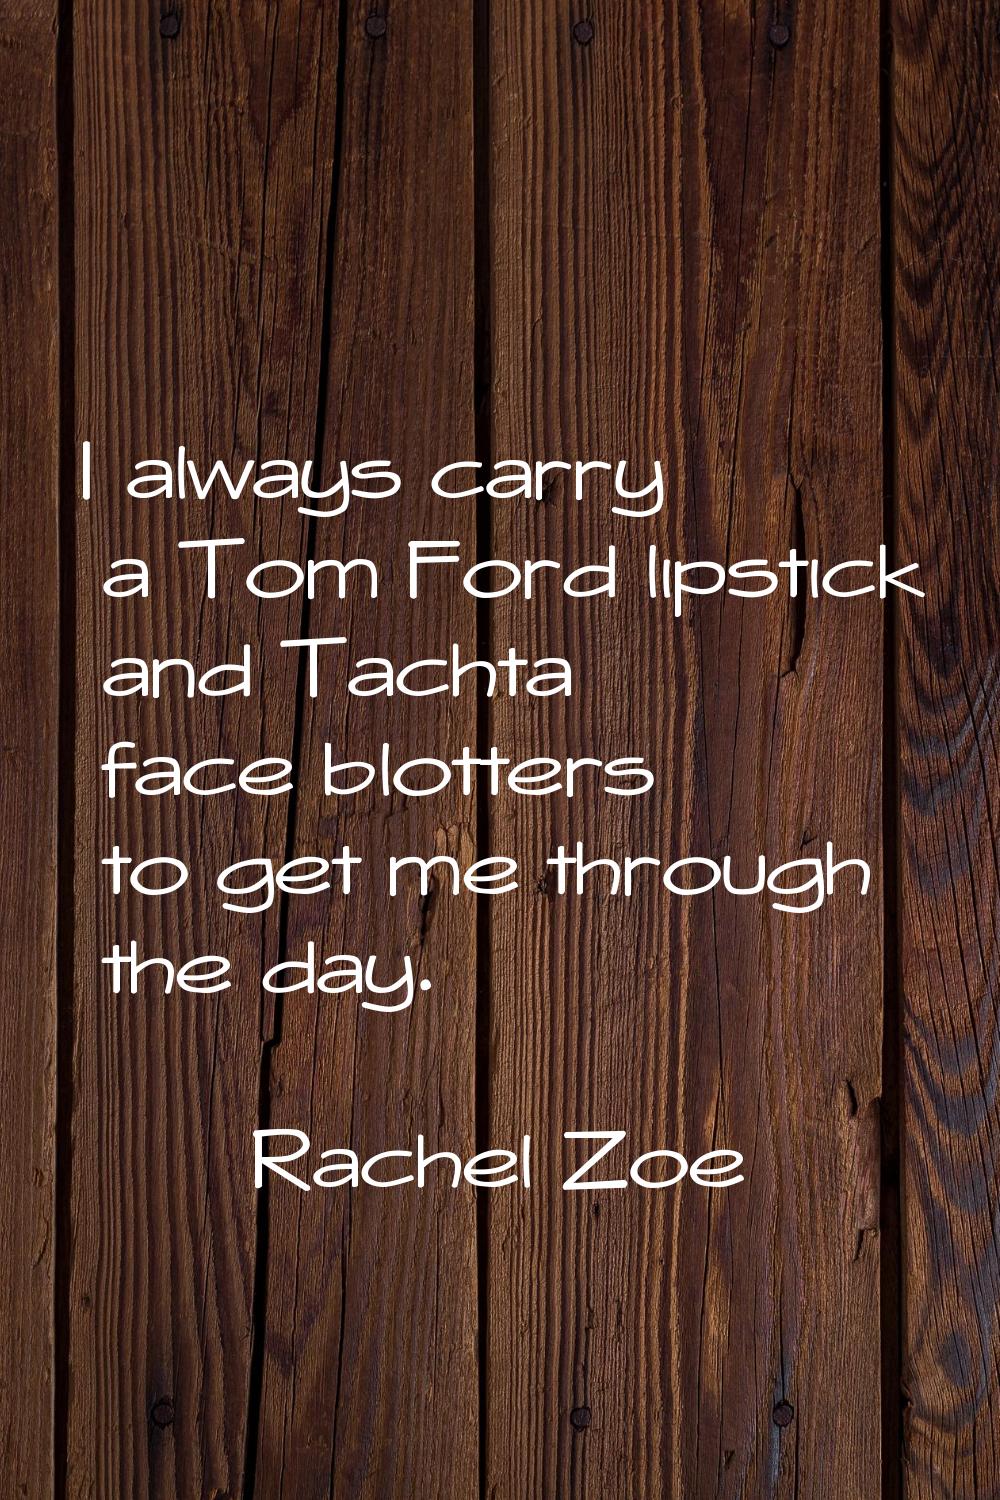 I always carry a Tom Ford lipstick and Tachta face blotters to get me through the day.